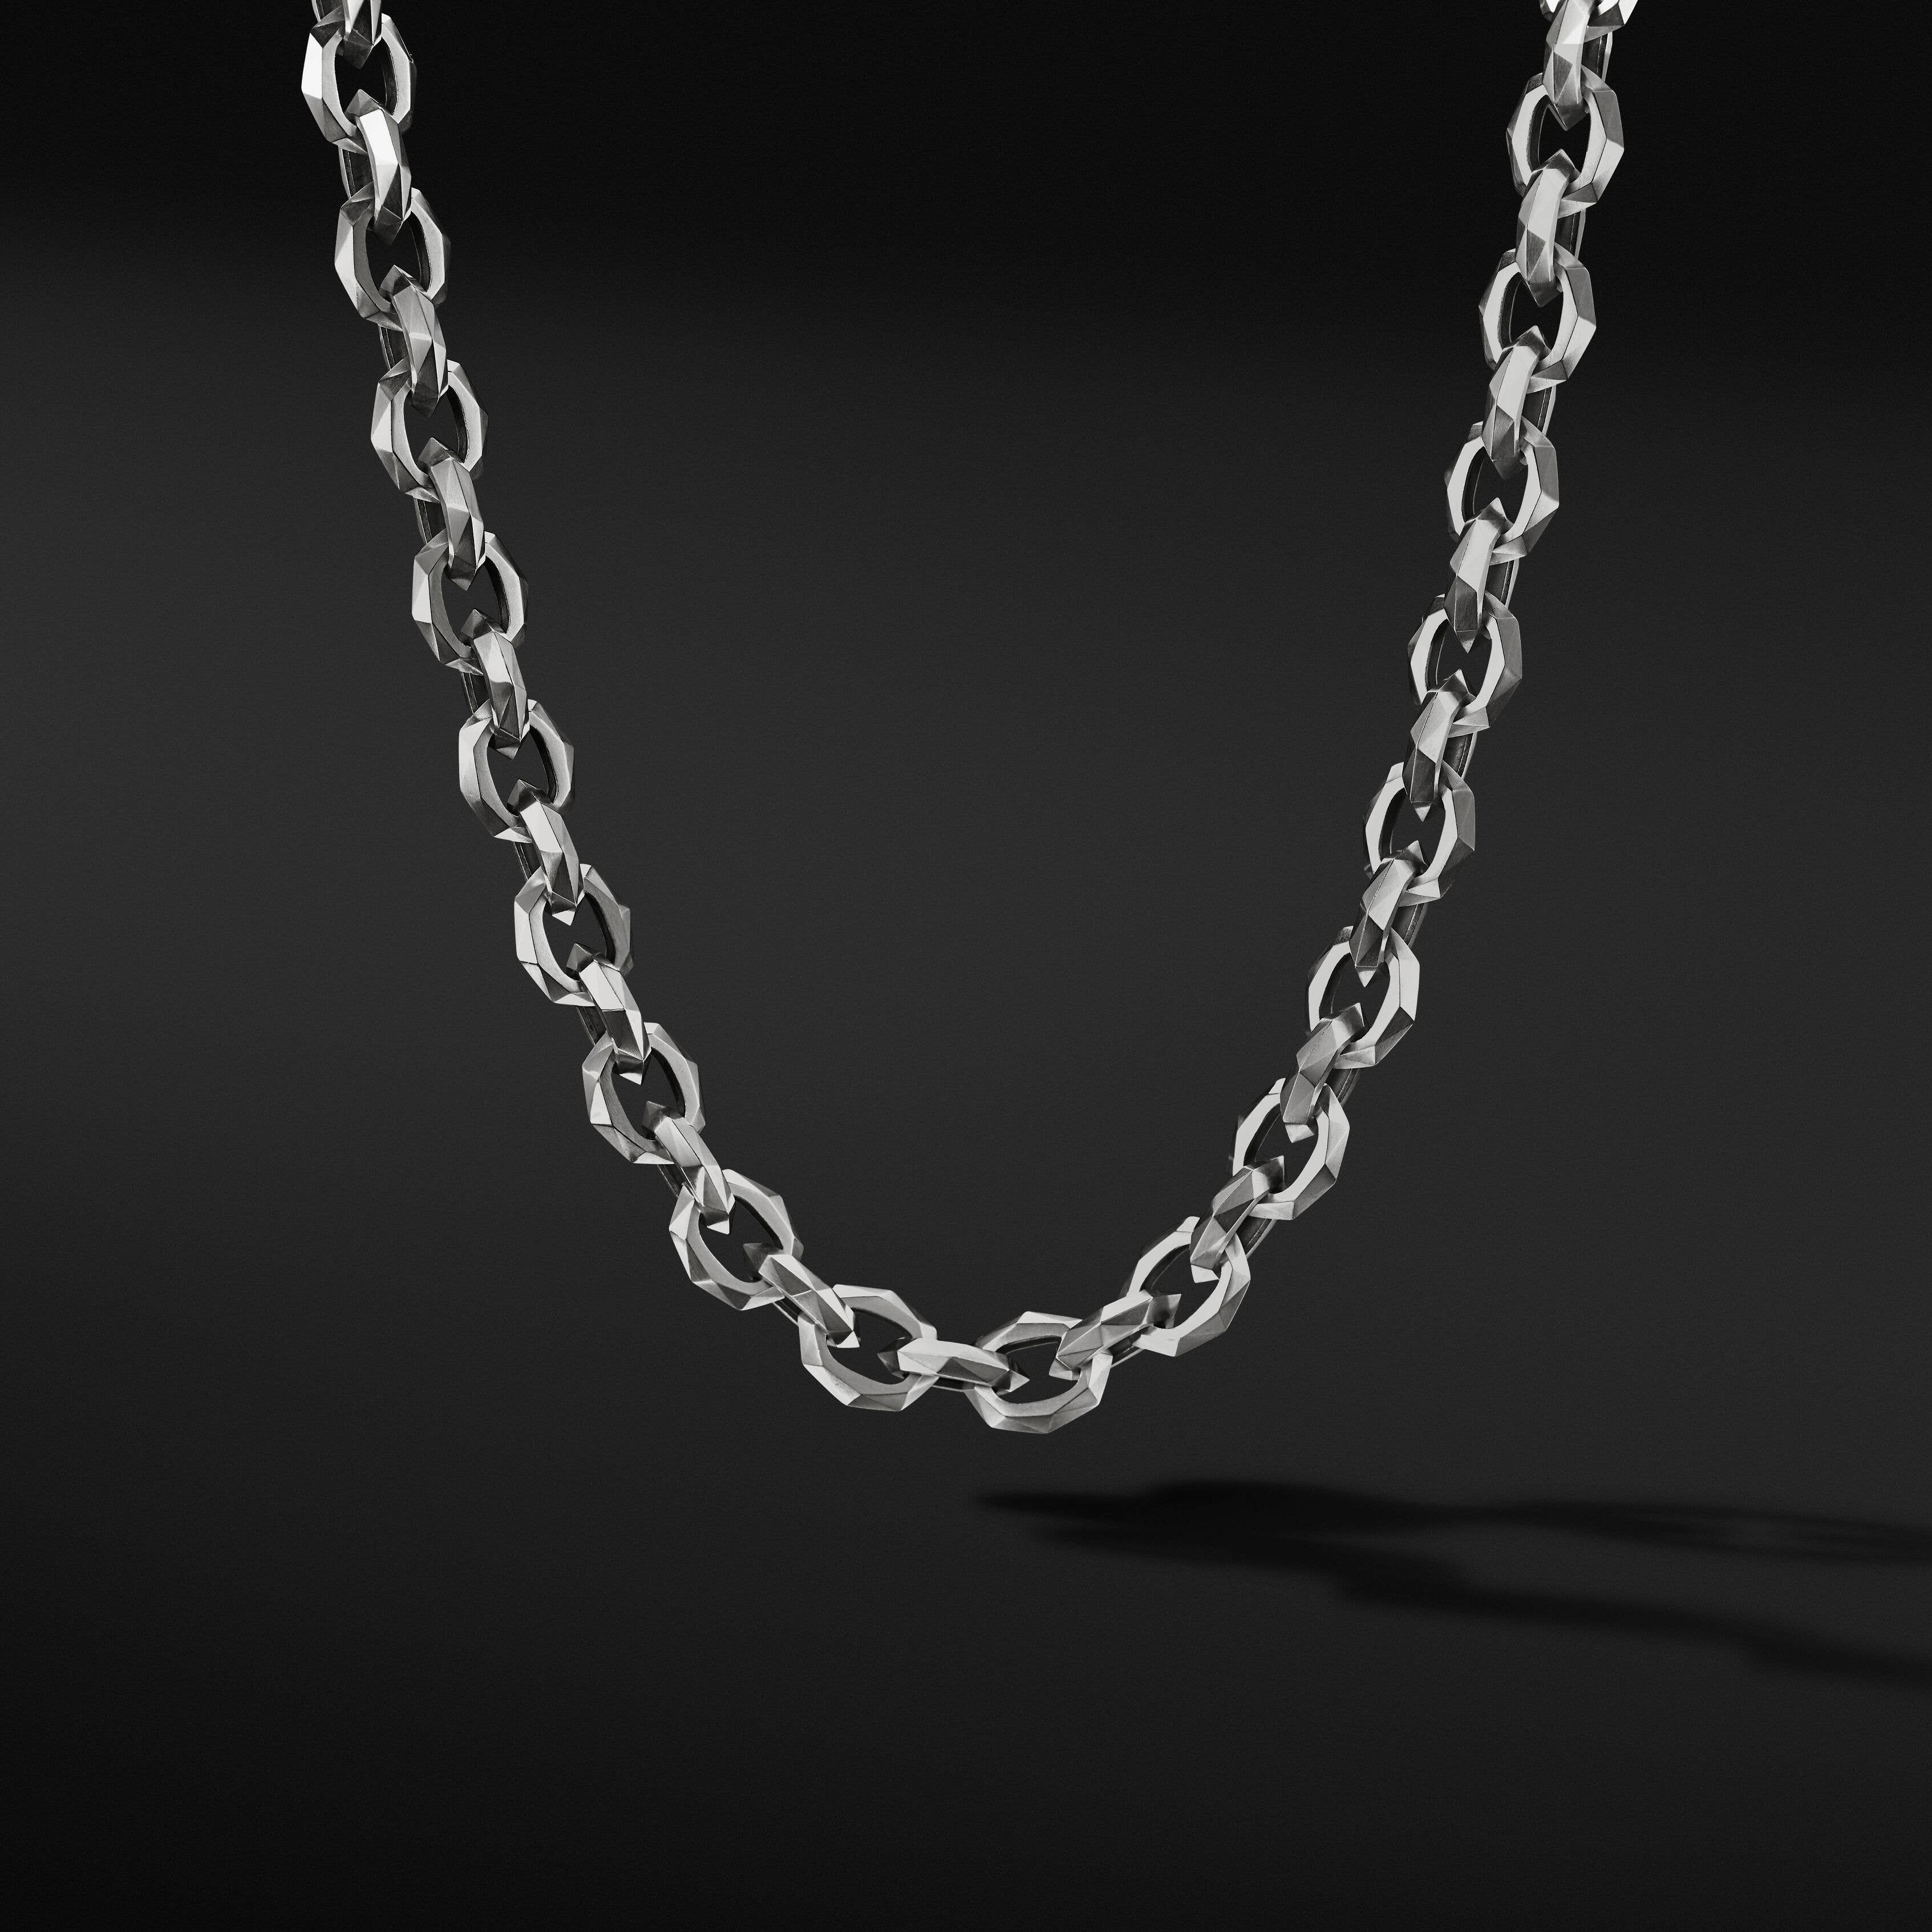 Torqued Faceted Chain Link Necklace